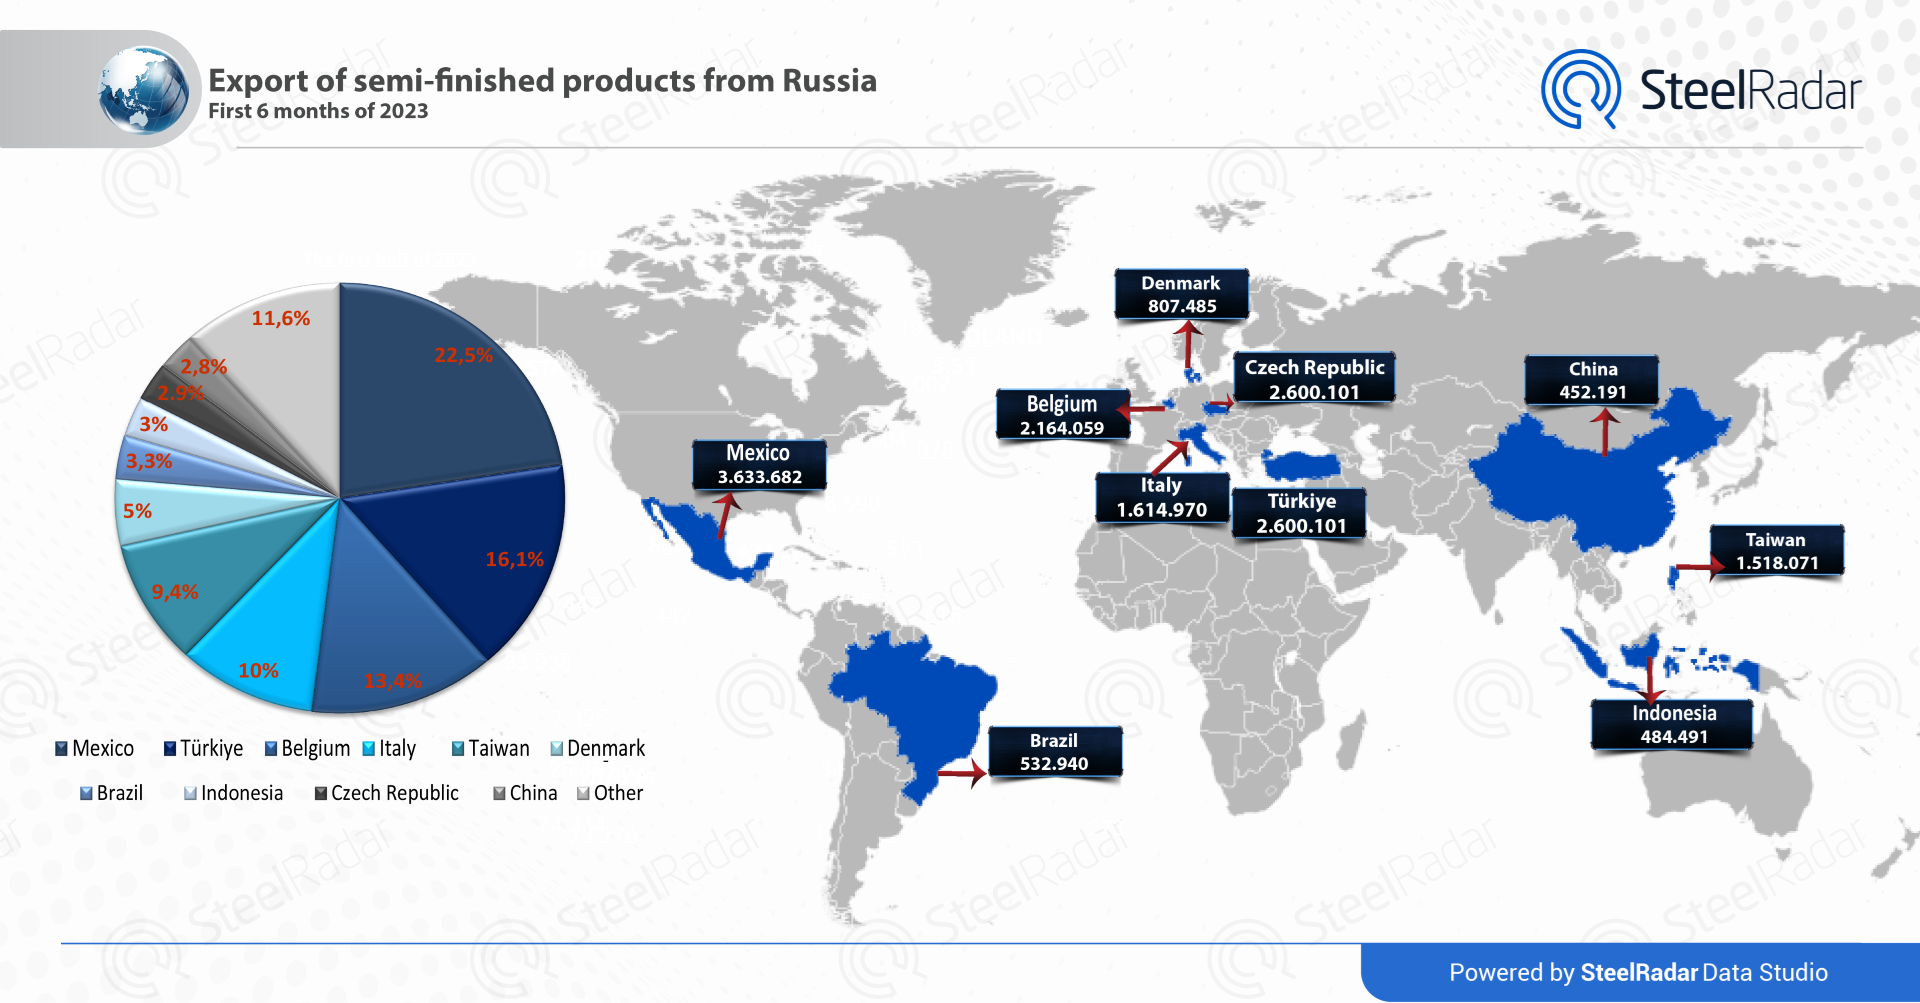 Export of semi-finished products from Russia in 2023